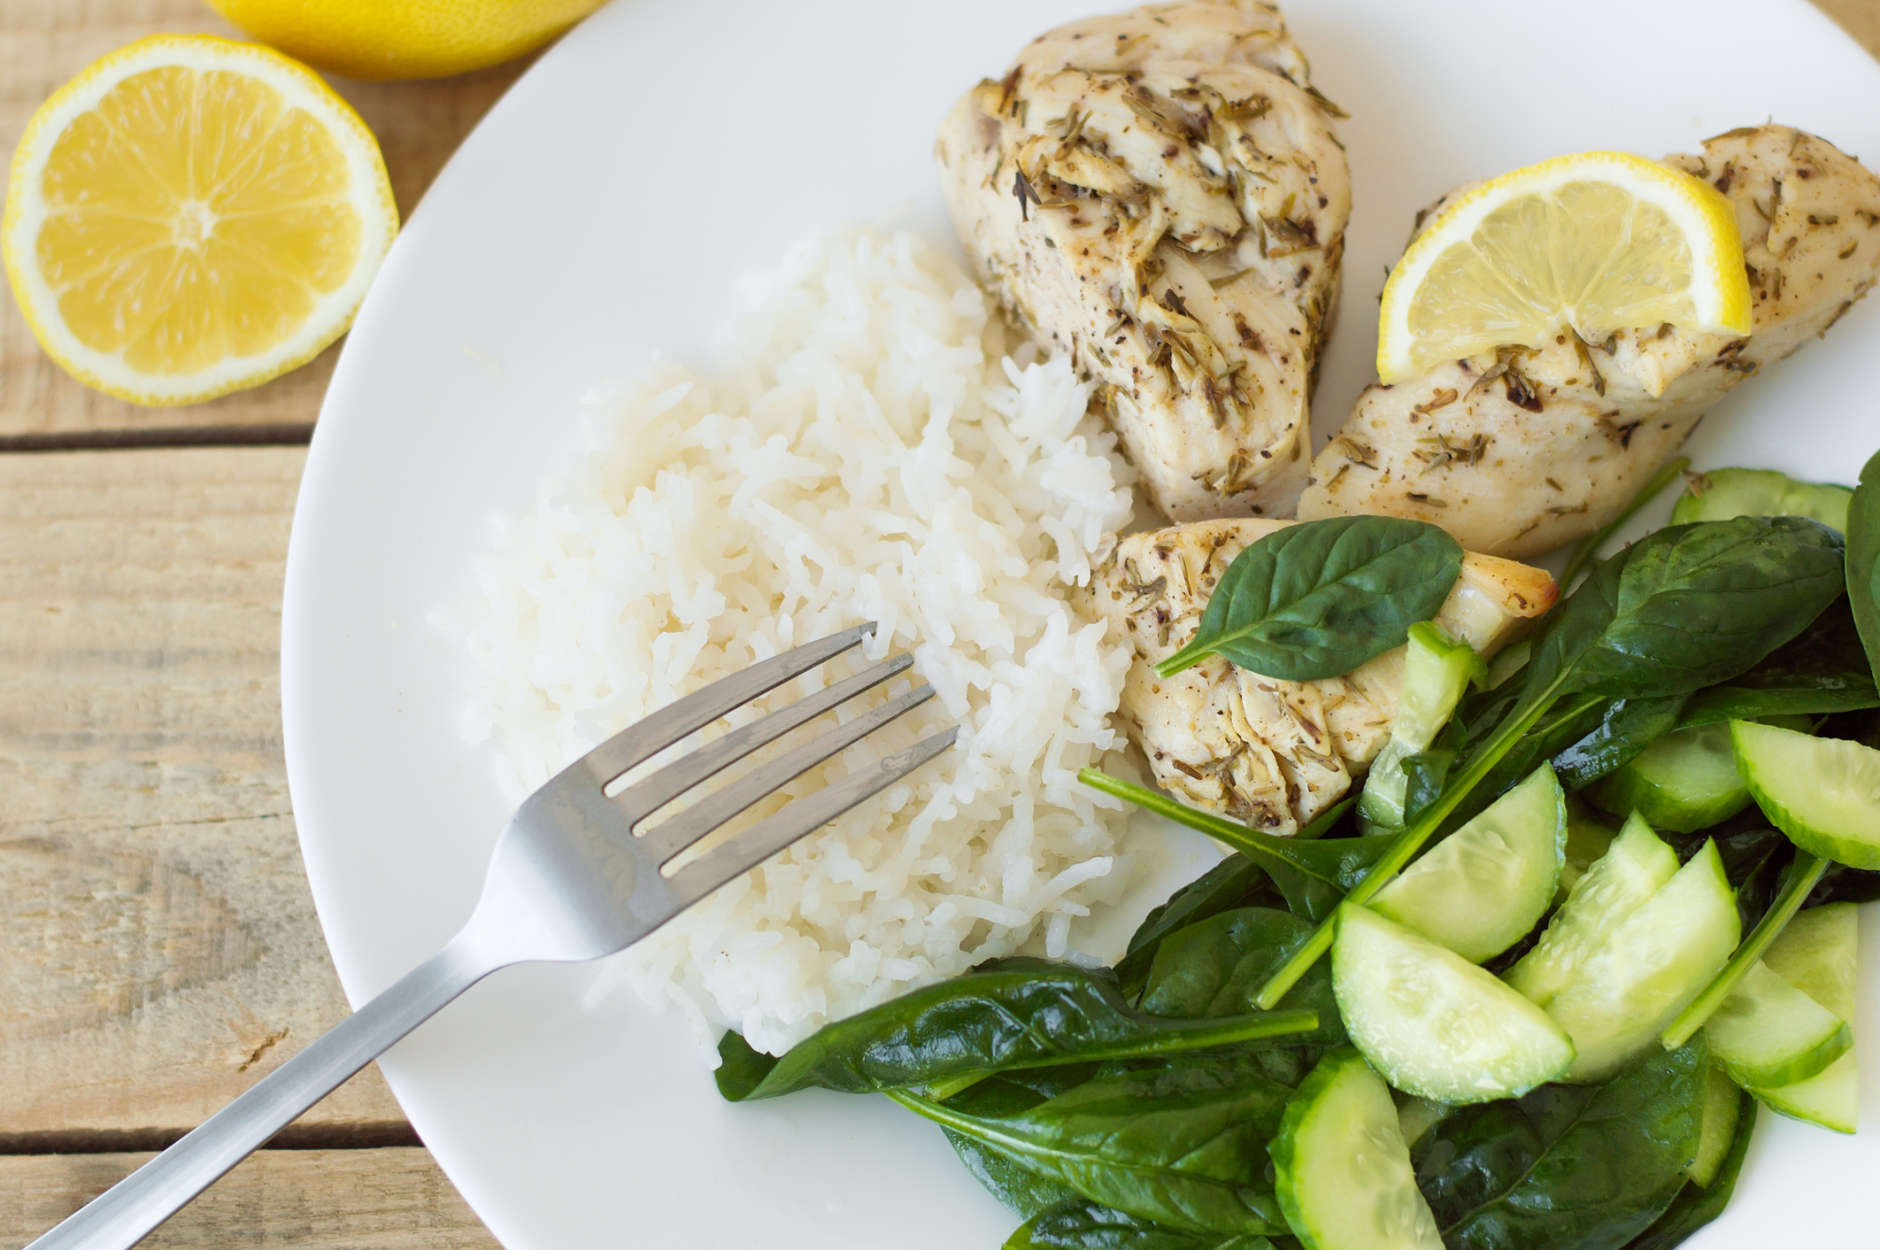 Baked chicken breasts with lemon, white rice and green spinach and cucumber salad